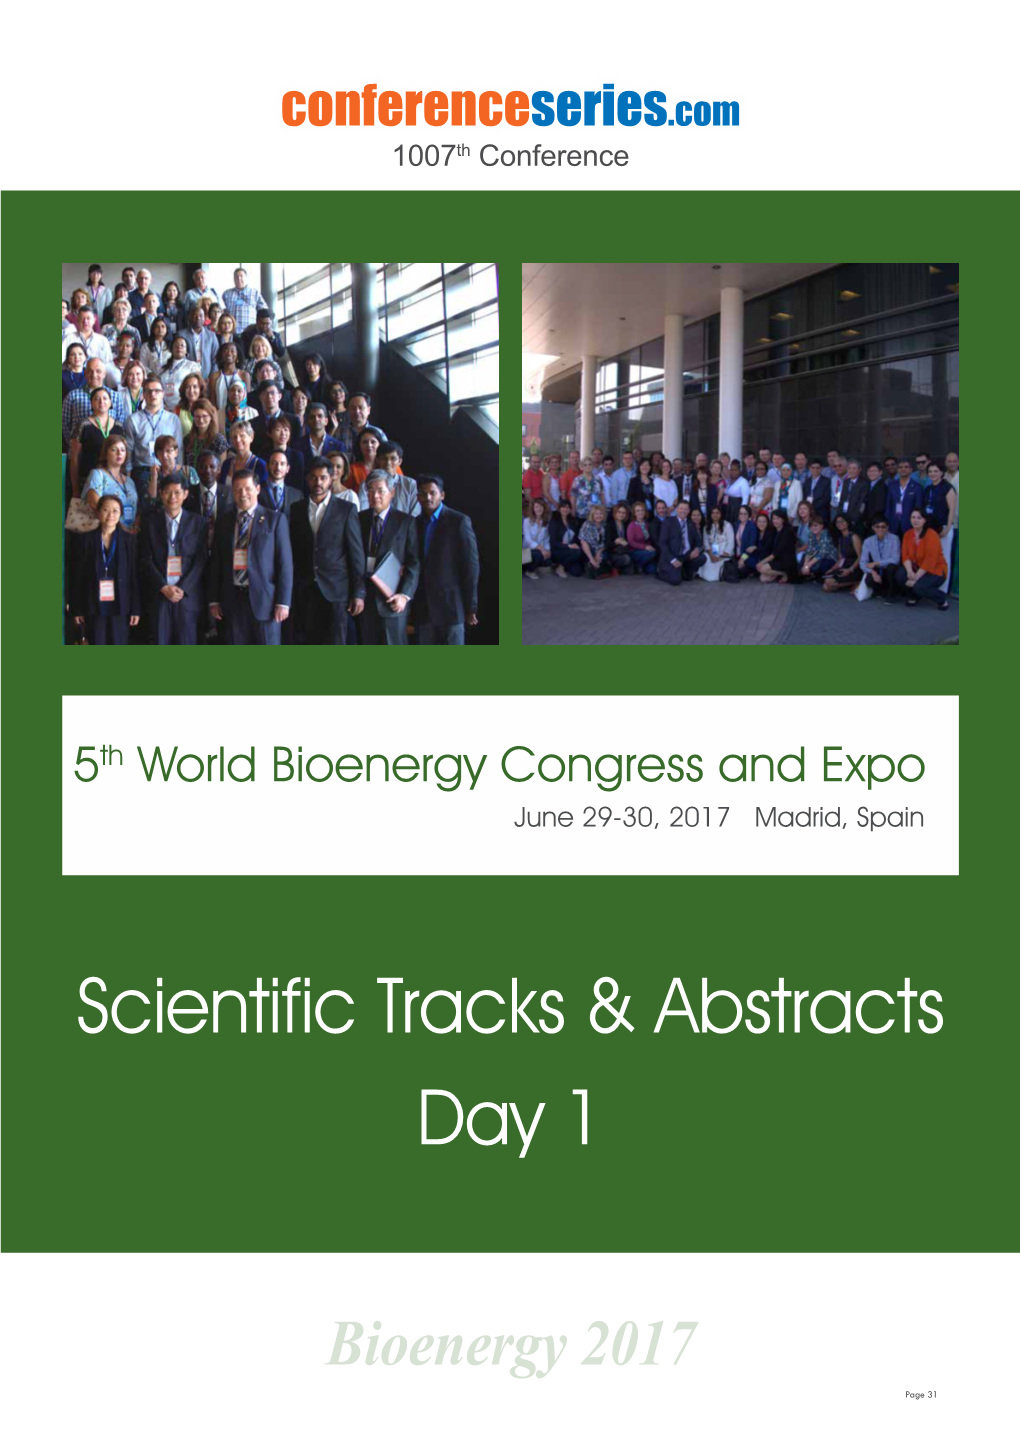 Day 1 Scientific Tracks & Abstracts